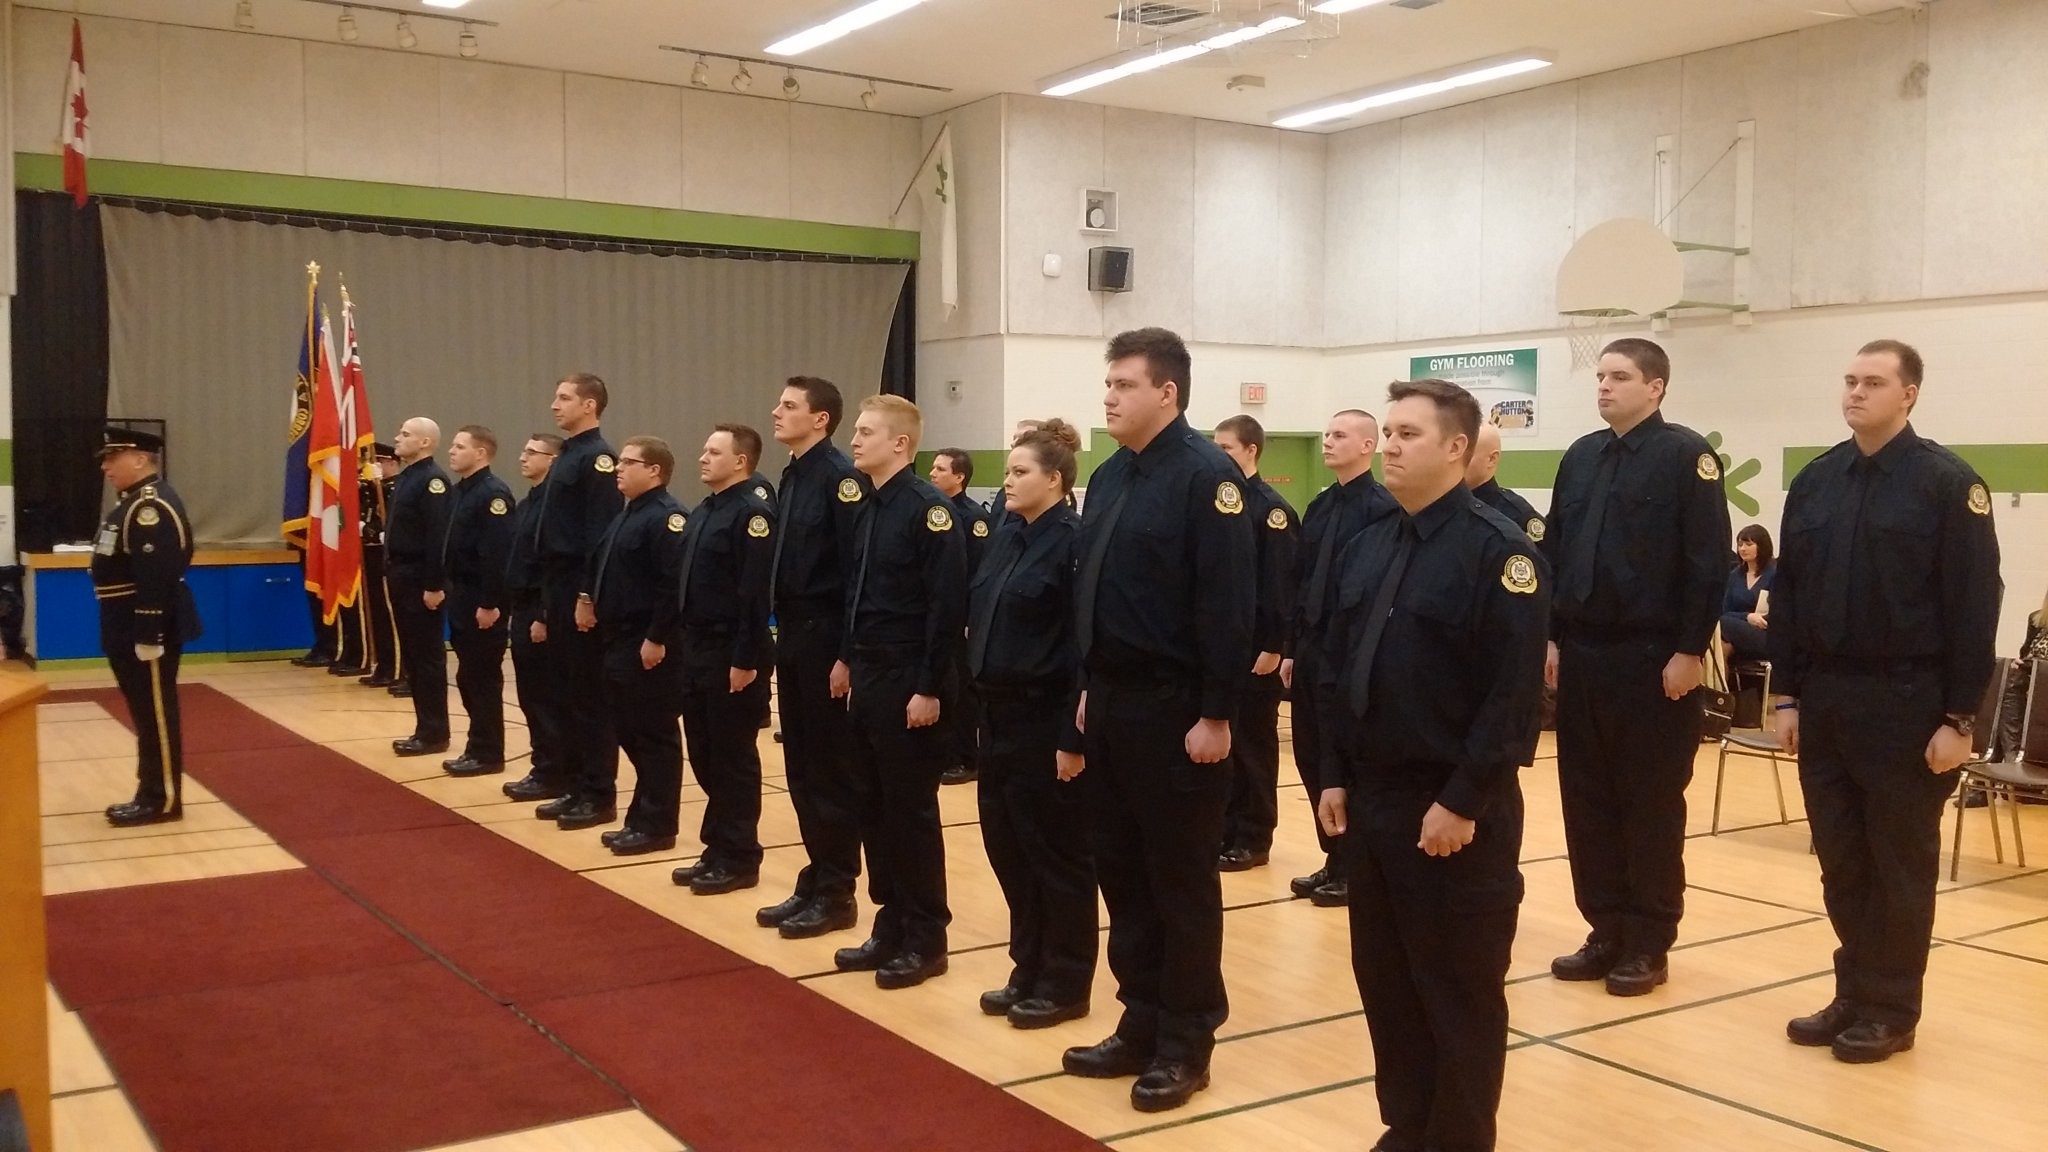 2048x1152 MCSCS on Twitter: "Congratulations to the 180 new correctional officers who  graduated from training: https://t.co/IHPD4nqsAD #ONsafe #Corrections ...